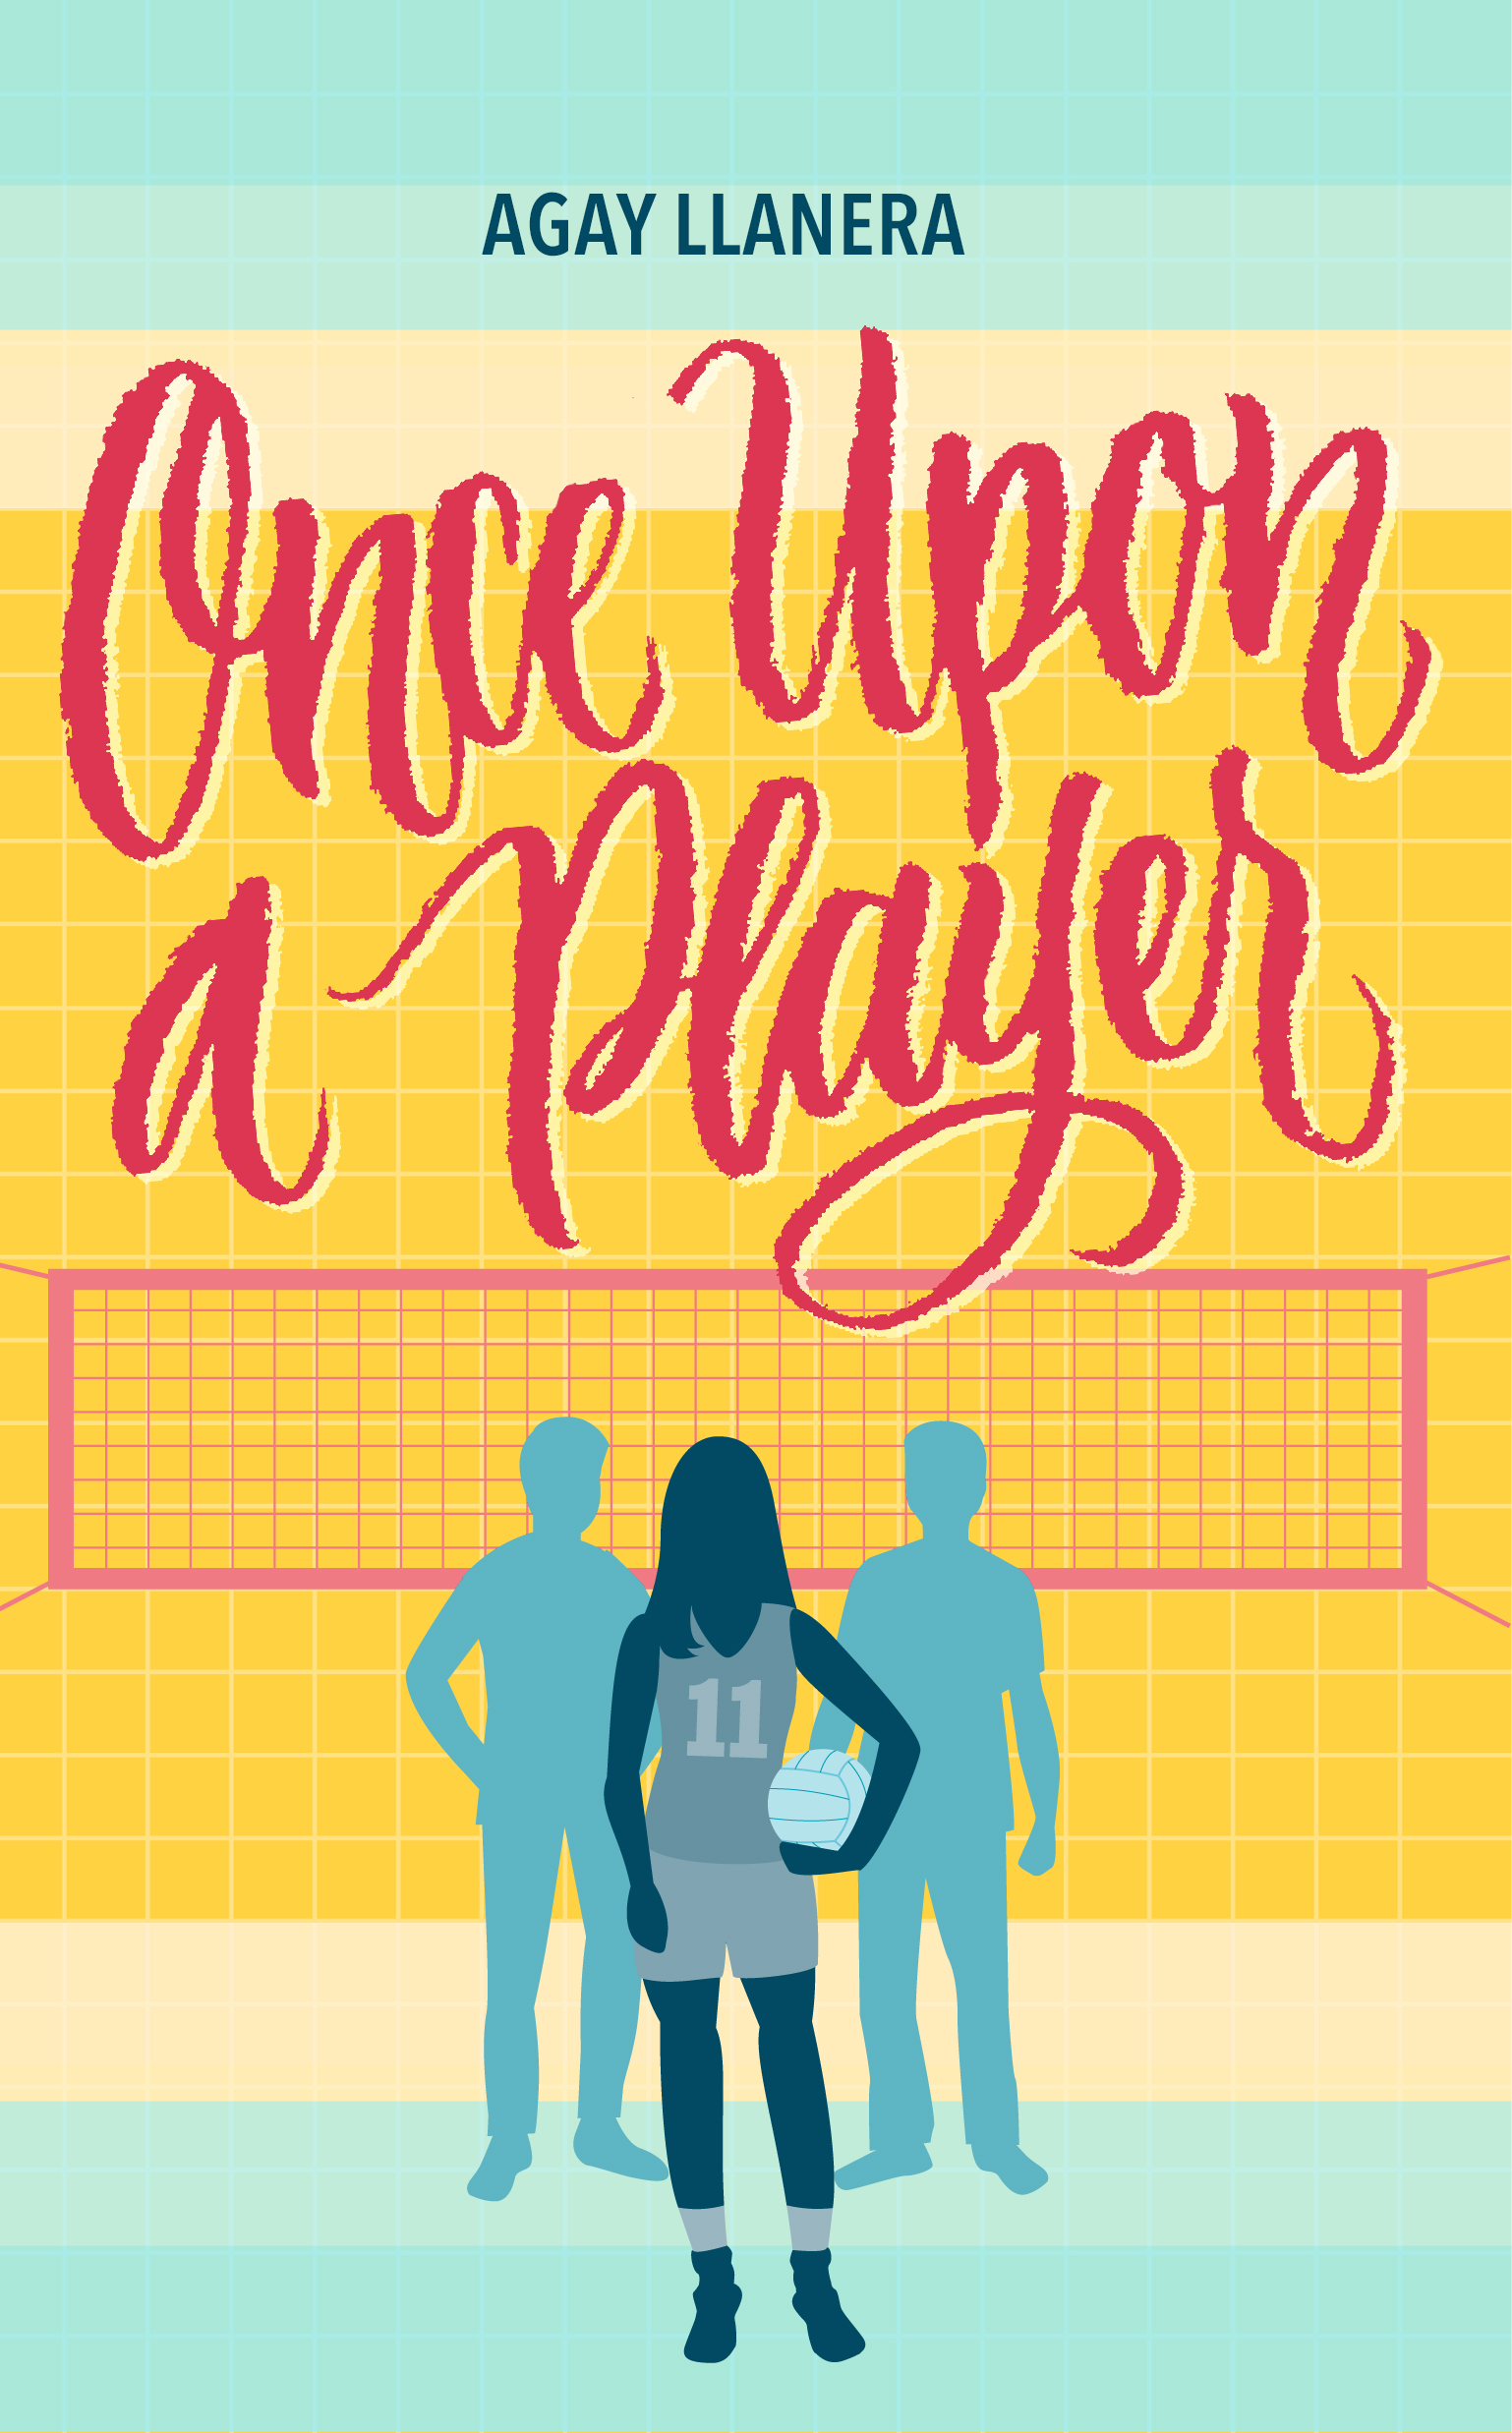 Once Upon a Player OFC